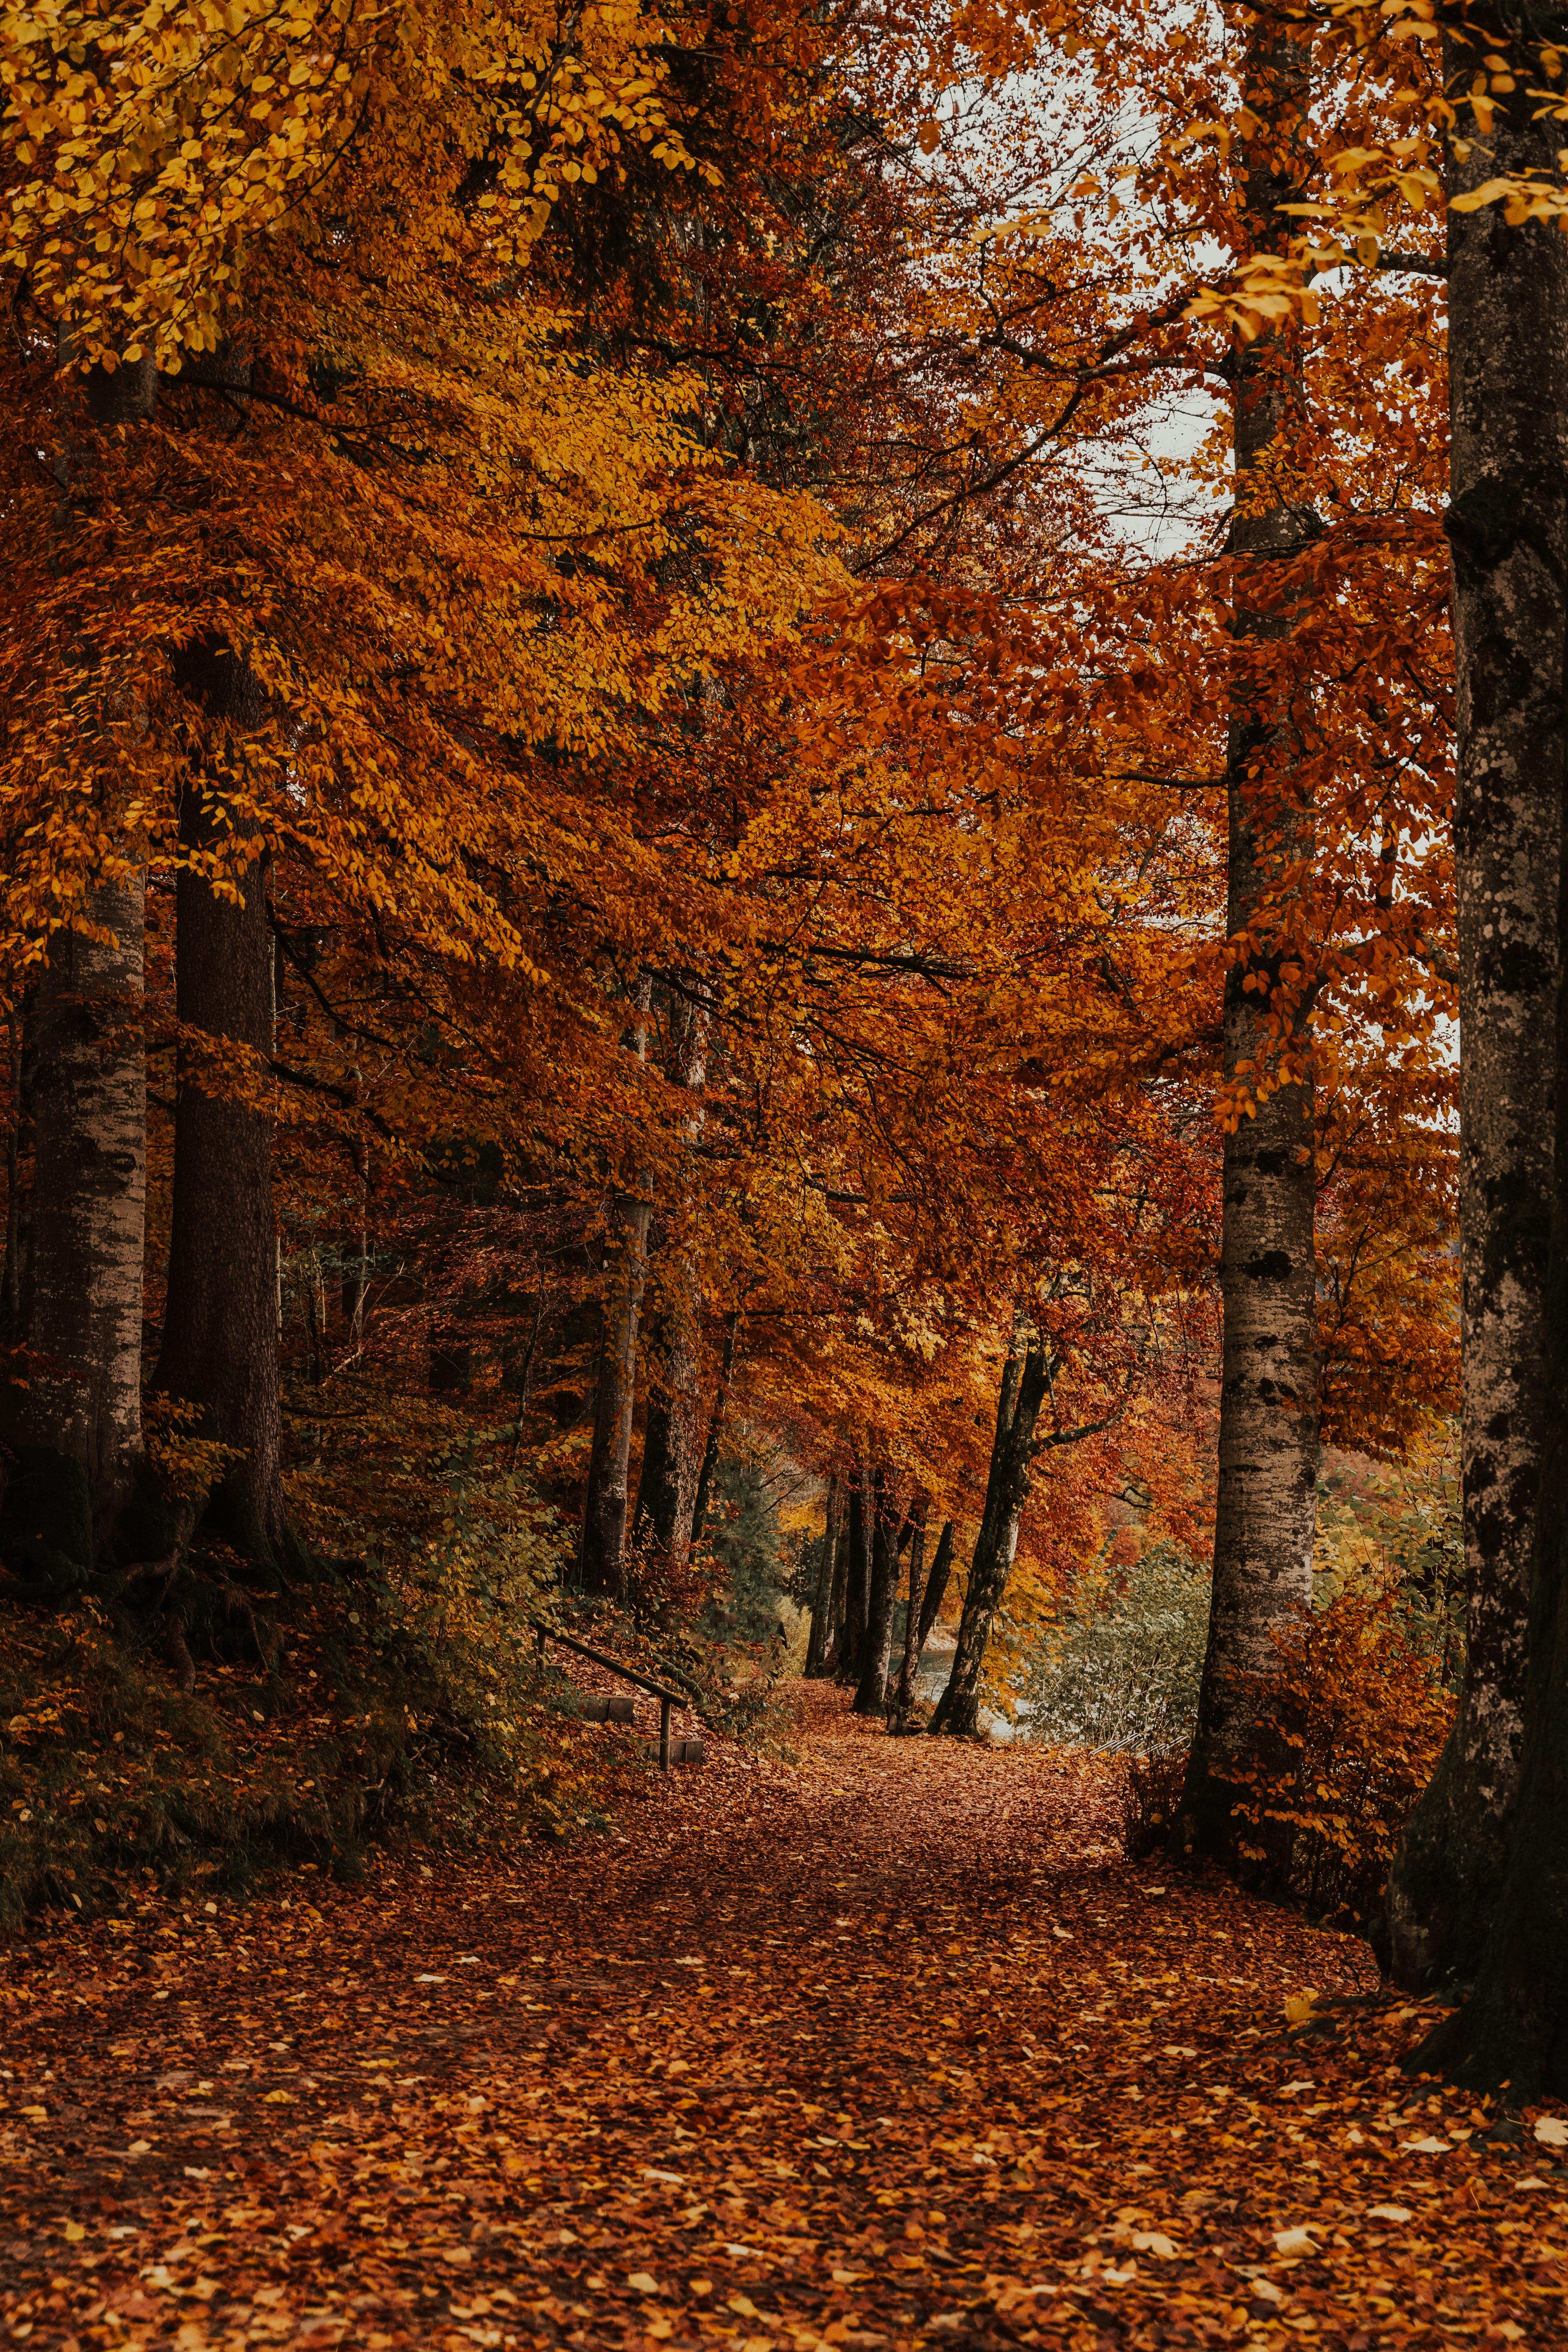 trees with orange leaves near a path